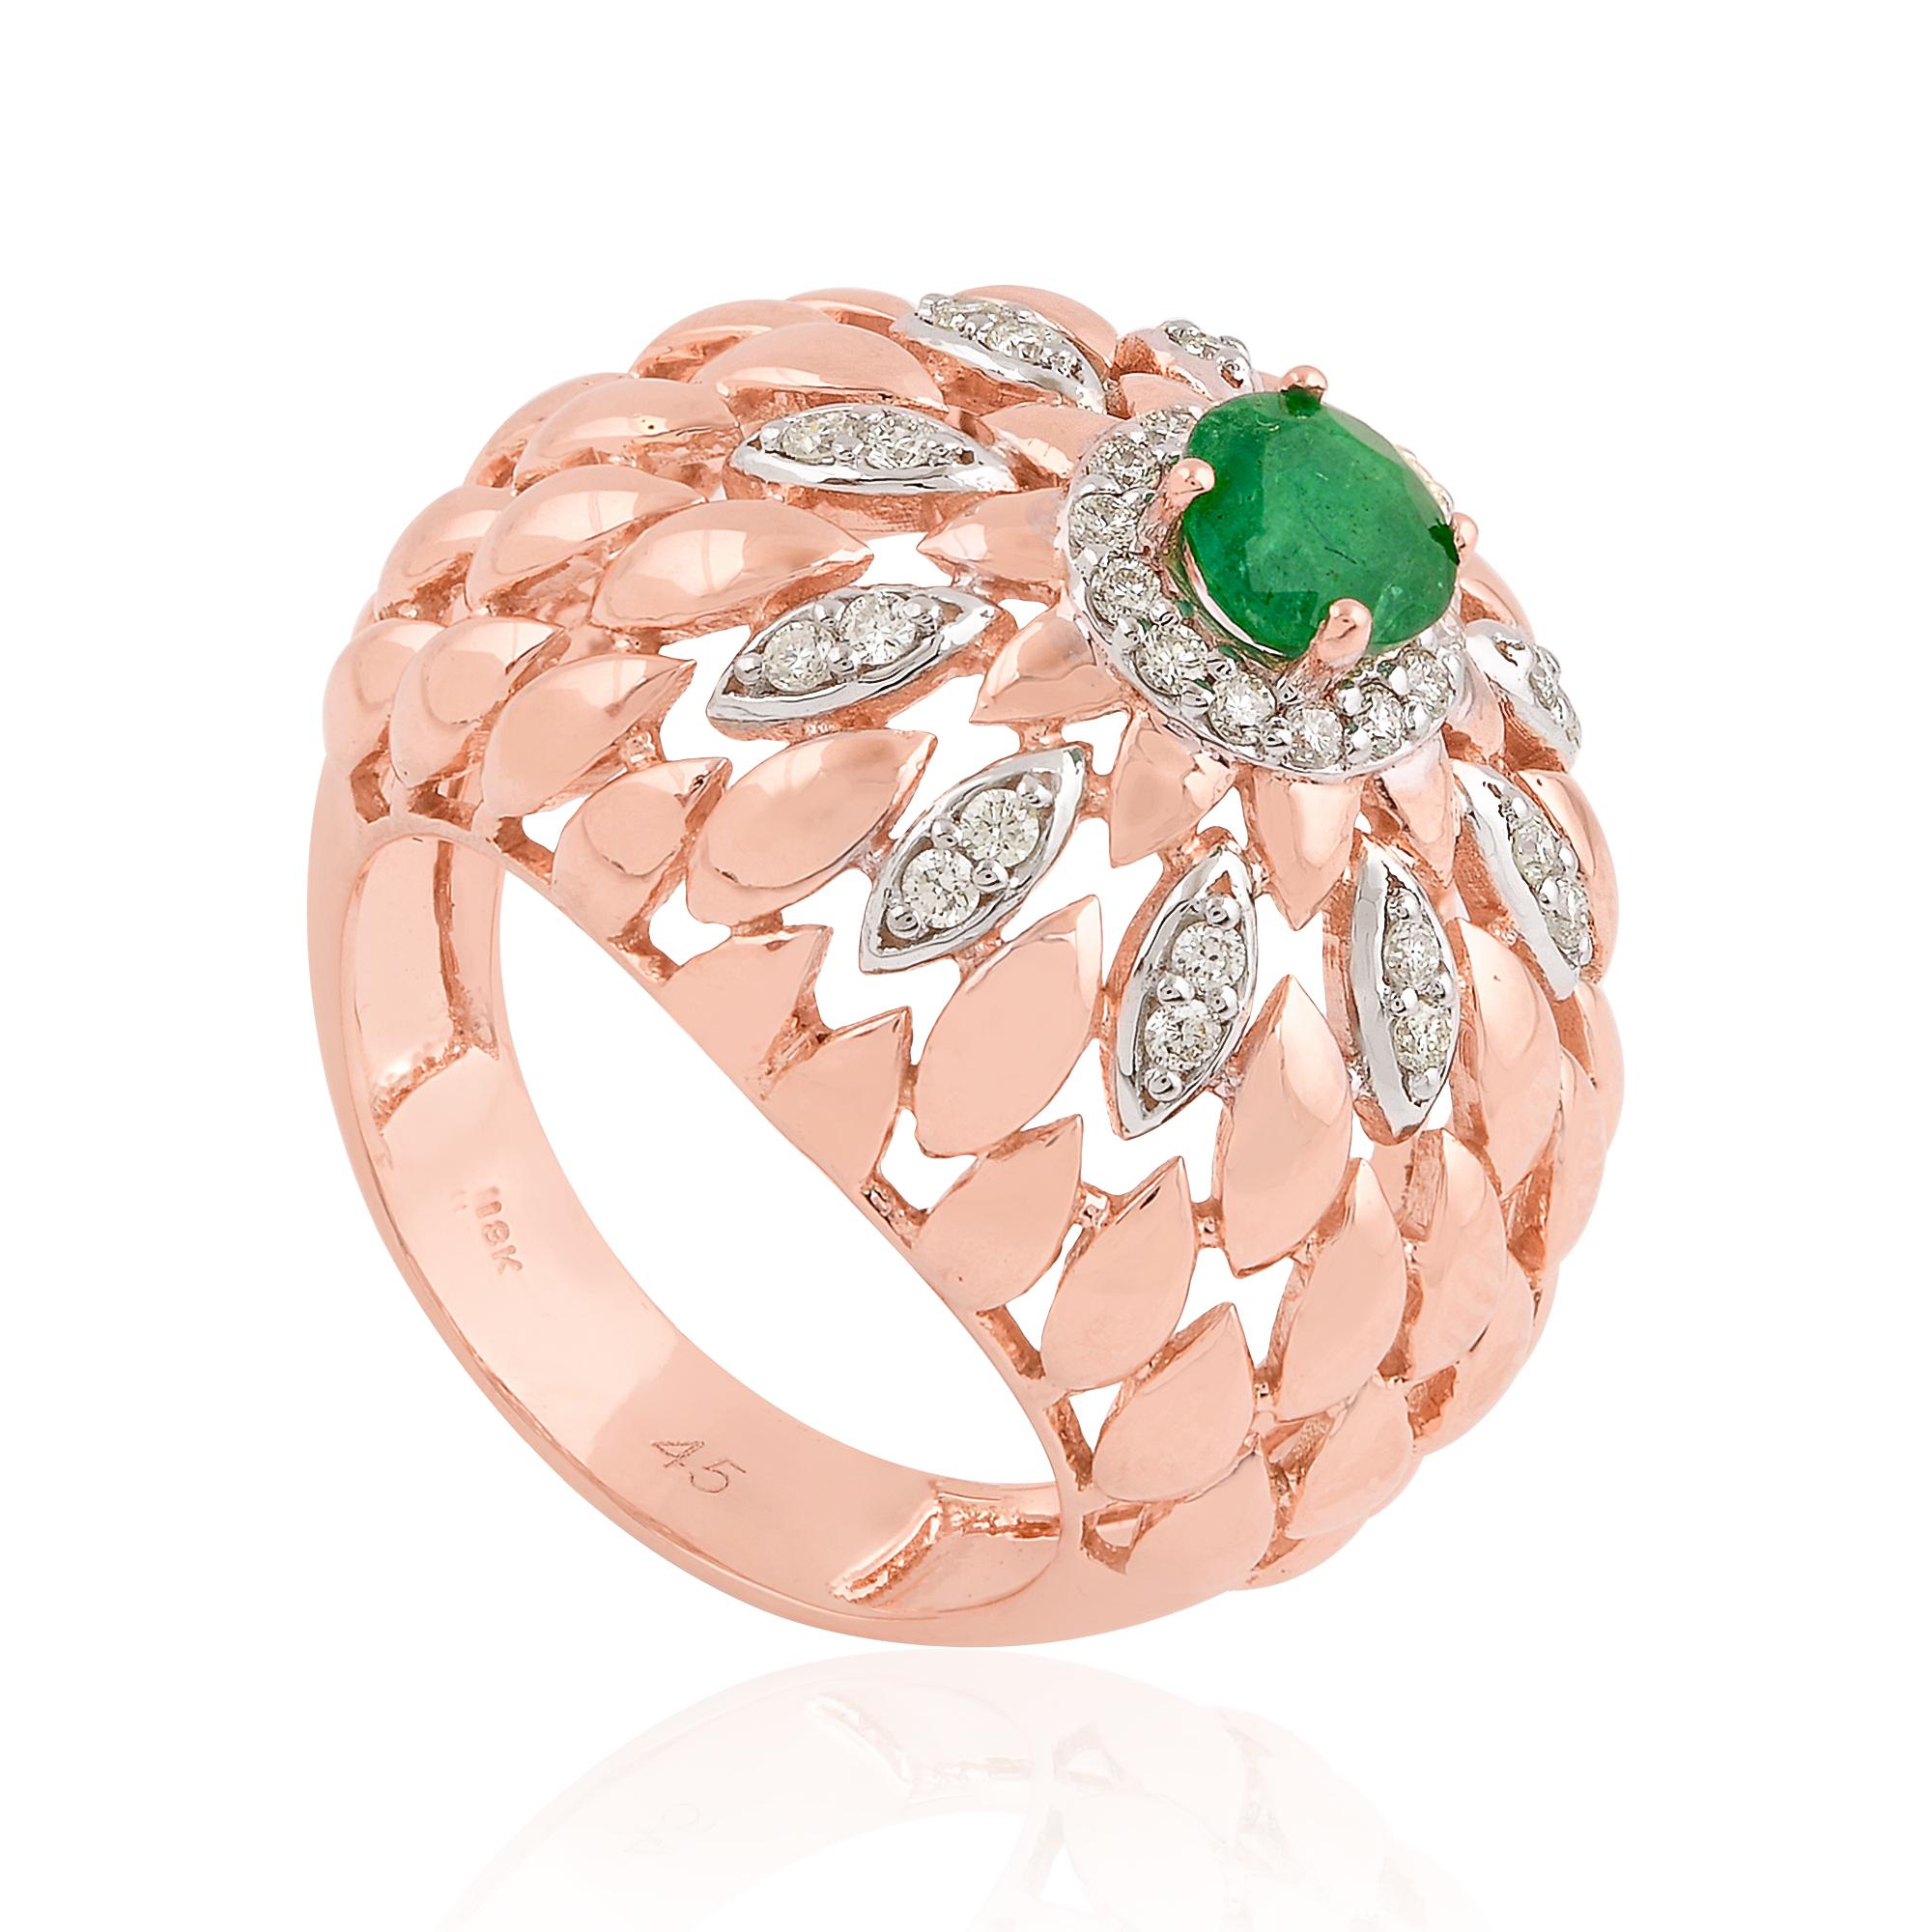 Zambian Emerald Gemstone Dome Ring Diamond Pave Solid 14k Rose Gold Fine Jewelry For Sale 1